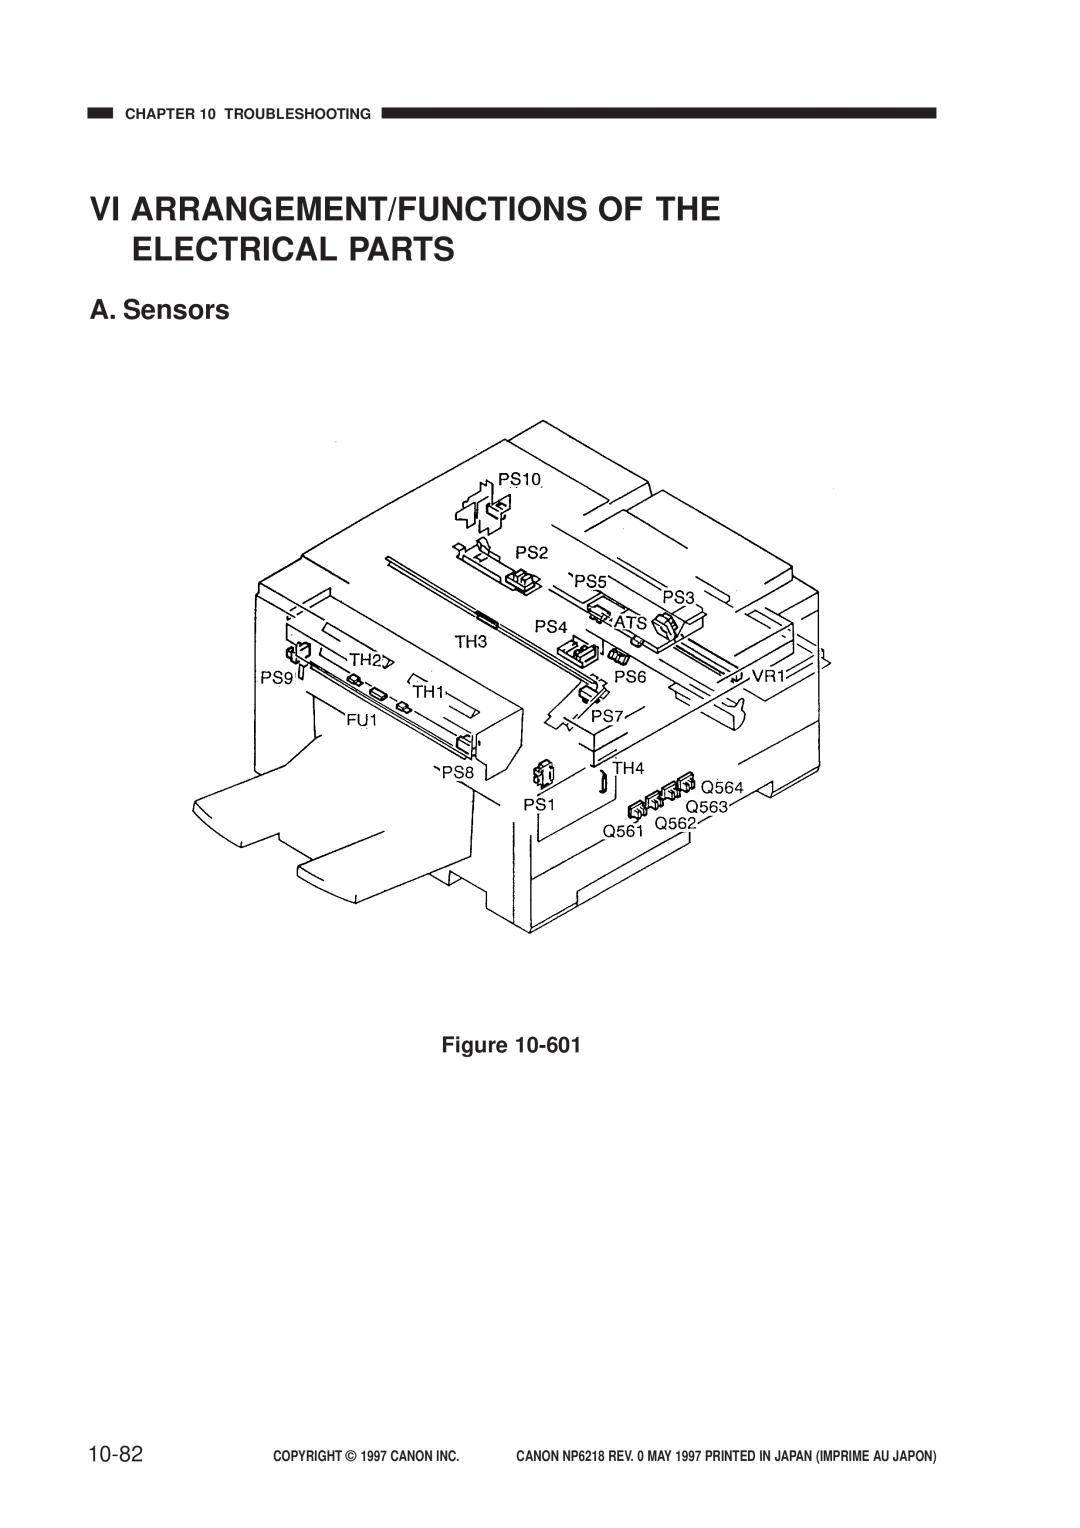 Canon NP6218, FY8-13EX-000 Vi Arrangement/Functions Of The Electrical Parts, A. Sensors, 10-82, Troubleshooting 